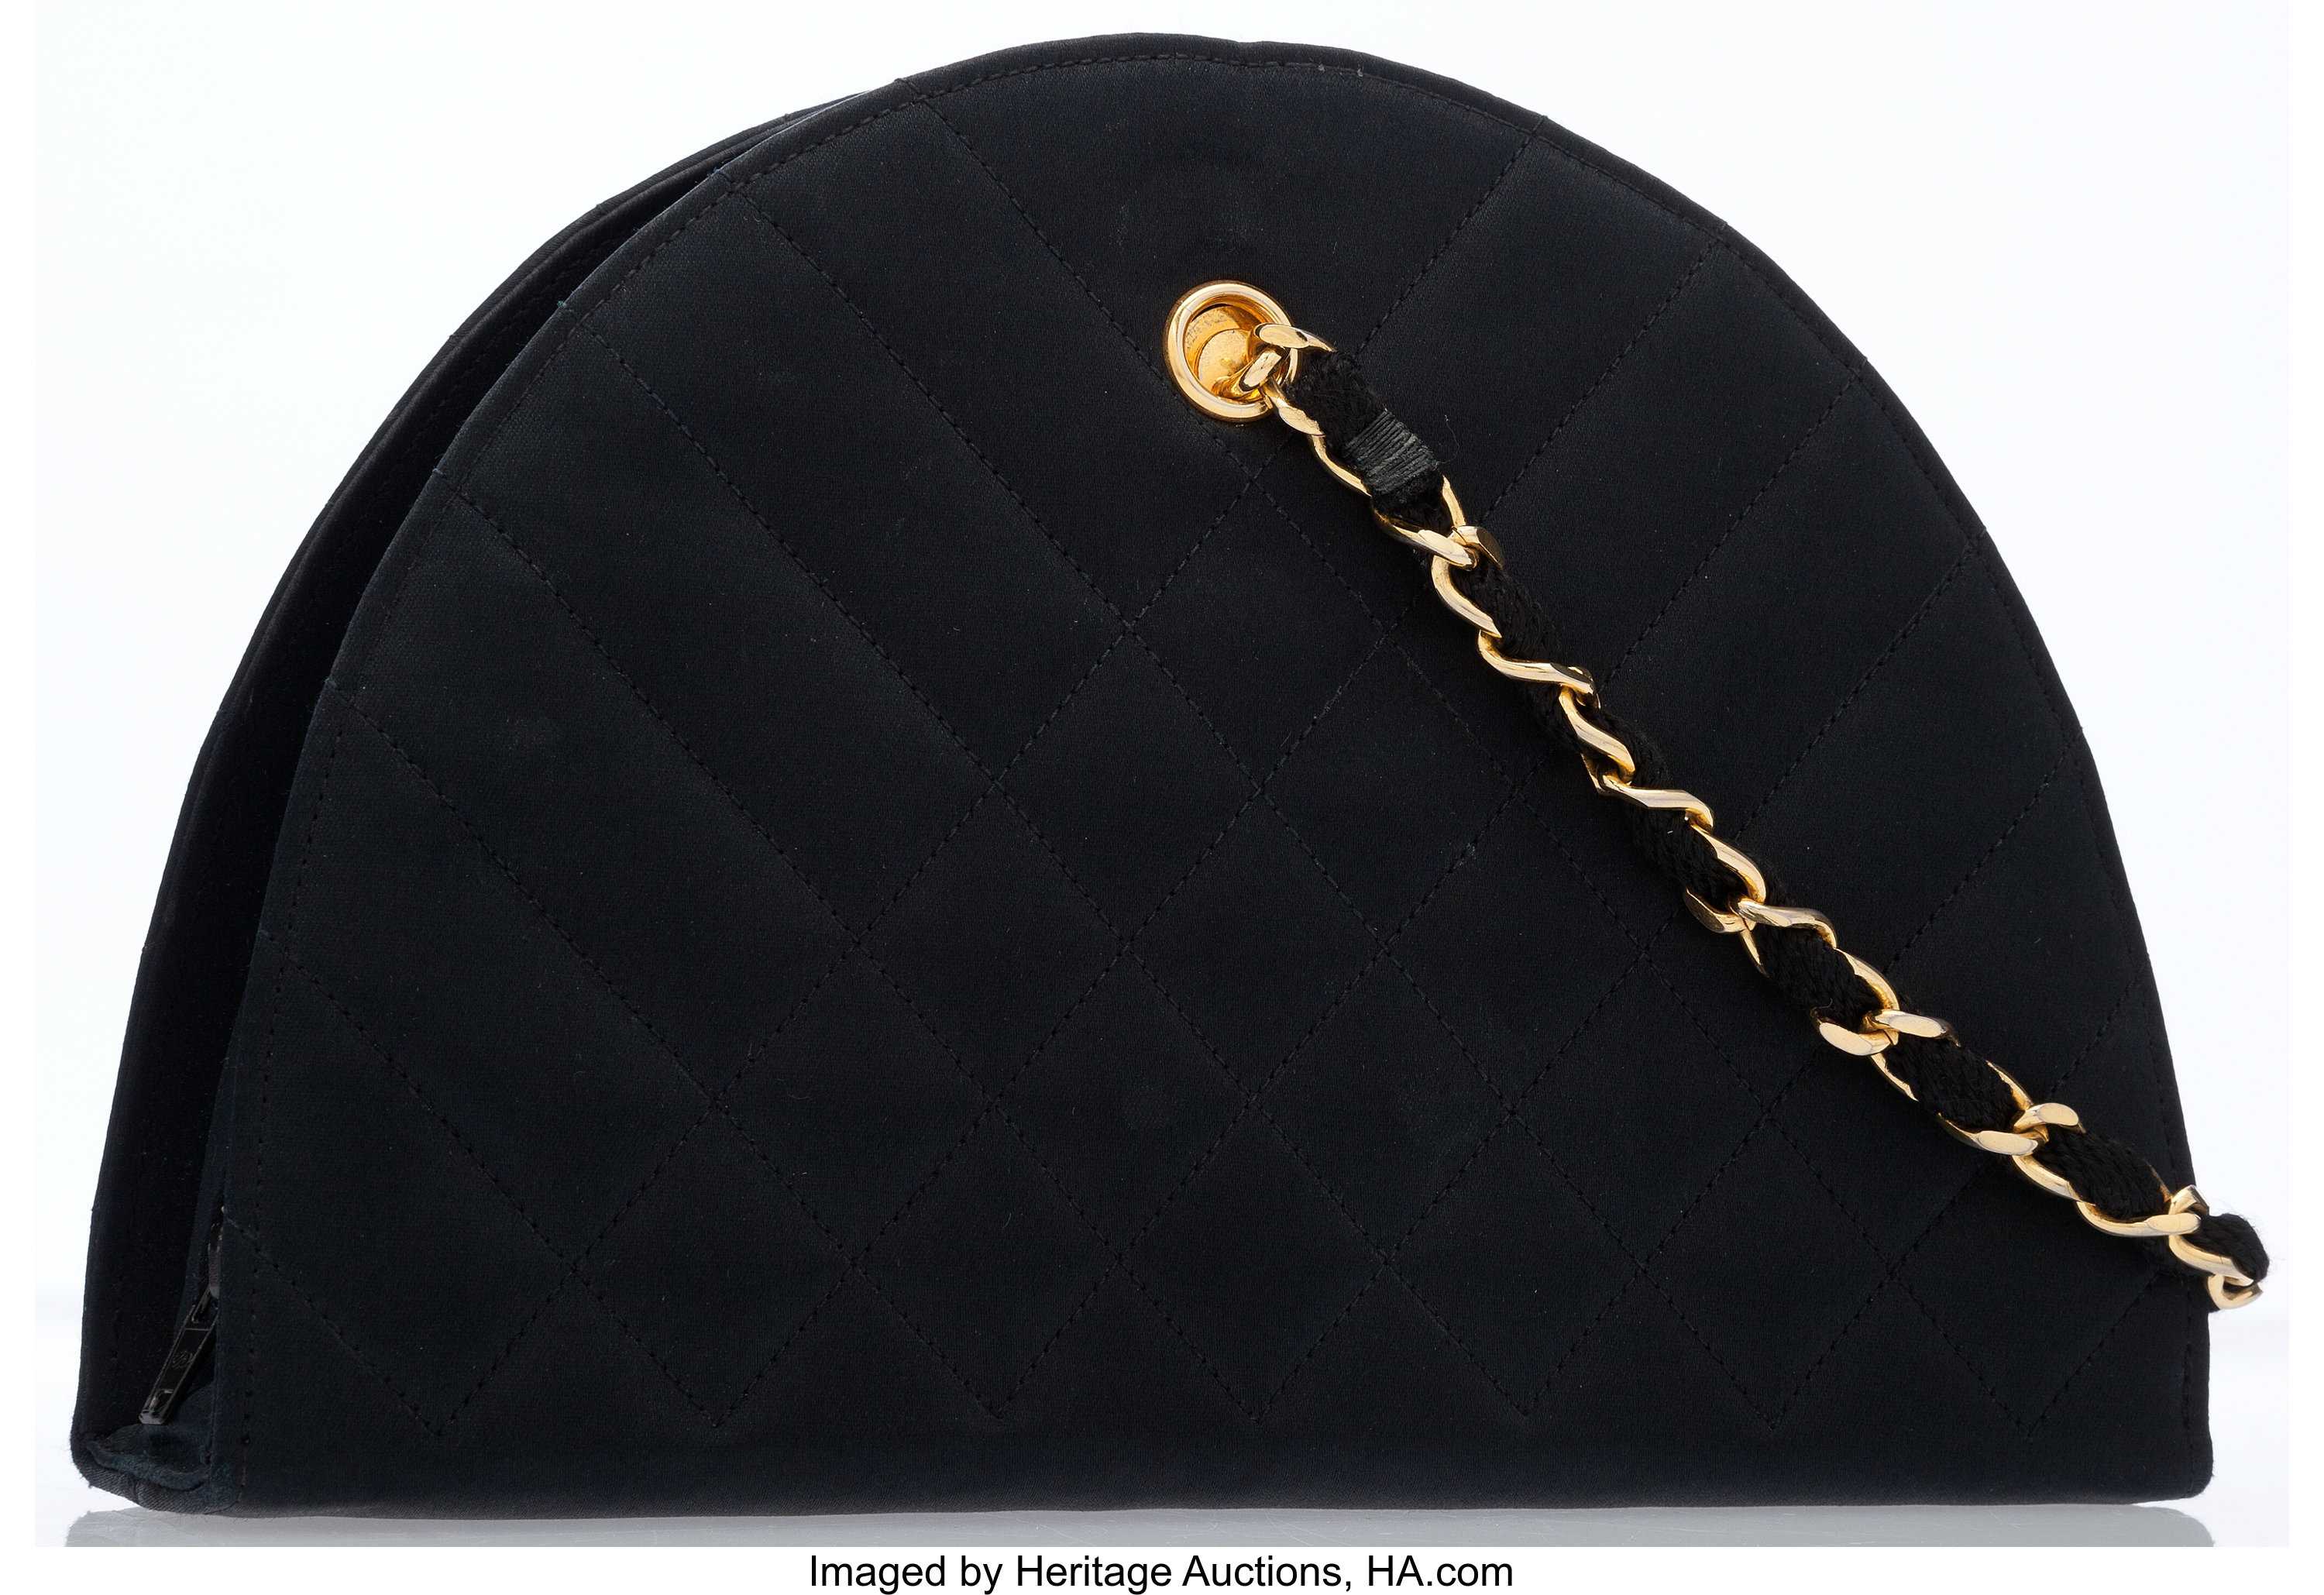 Chanel Black Quilted Satin Half-Moon Bag with Gold Hardware